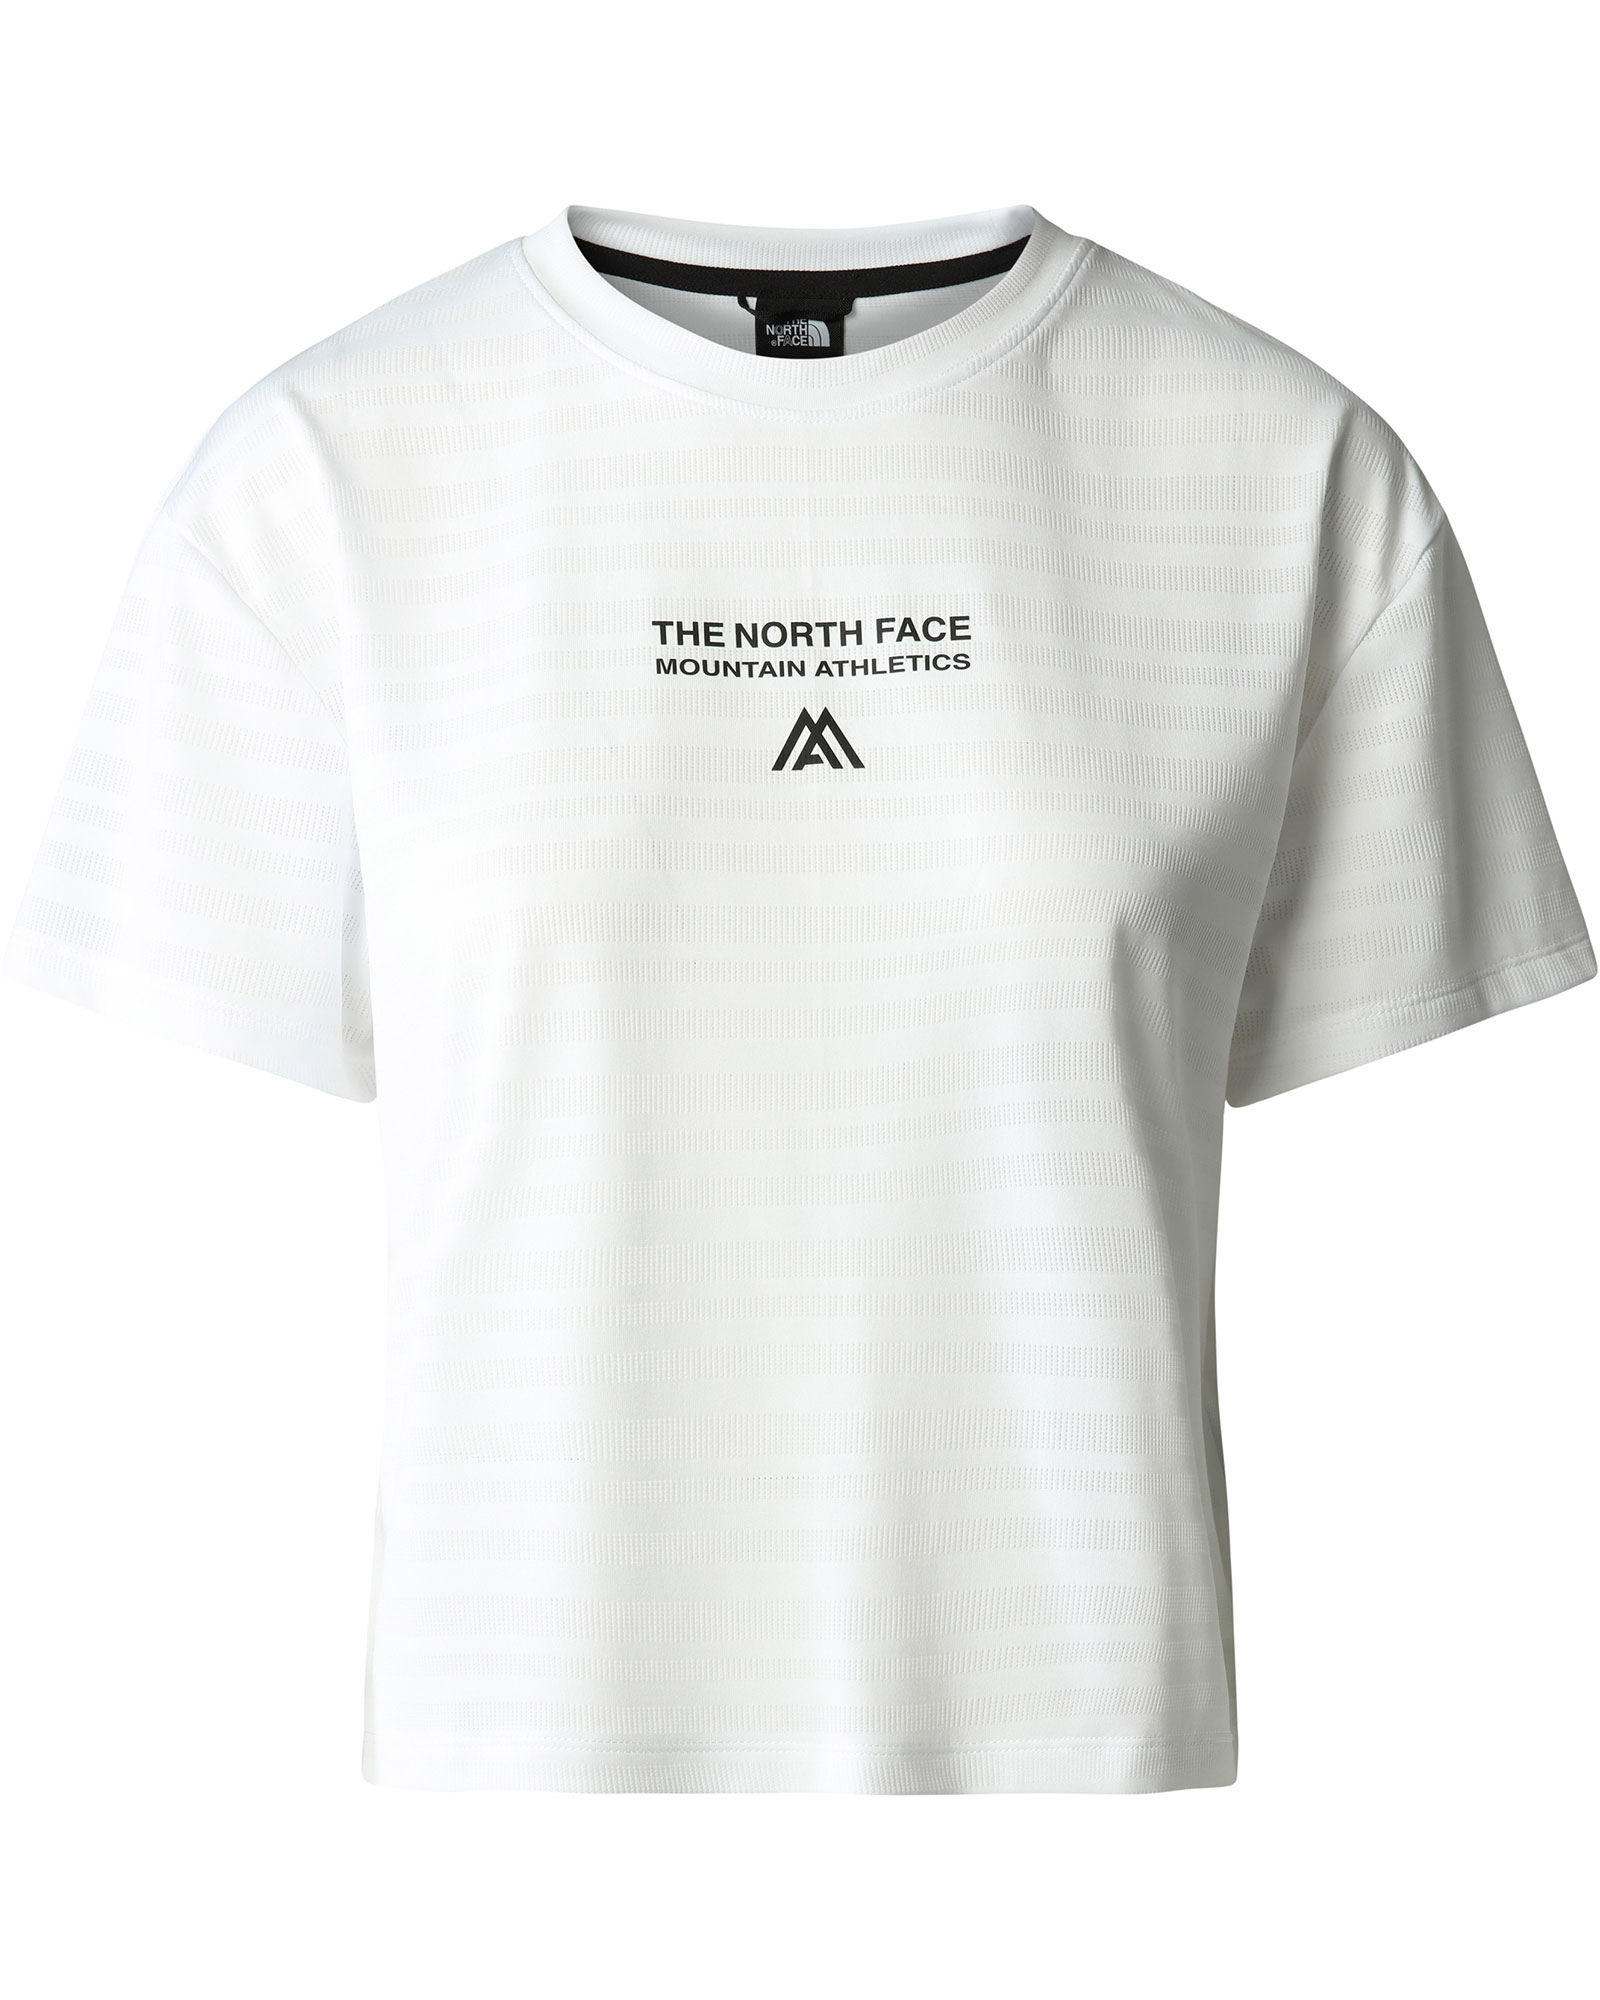 The North Face Women’s MA T Shirt - TNF White S